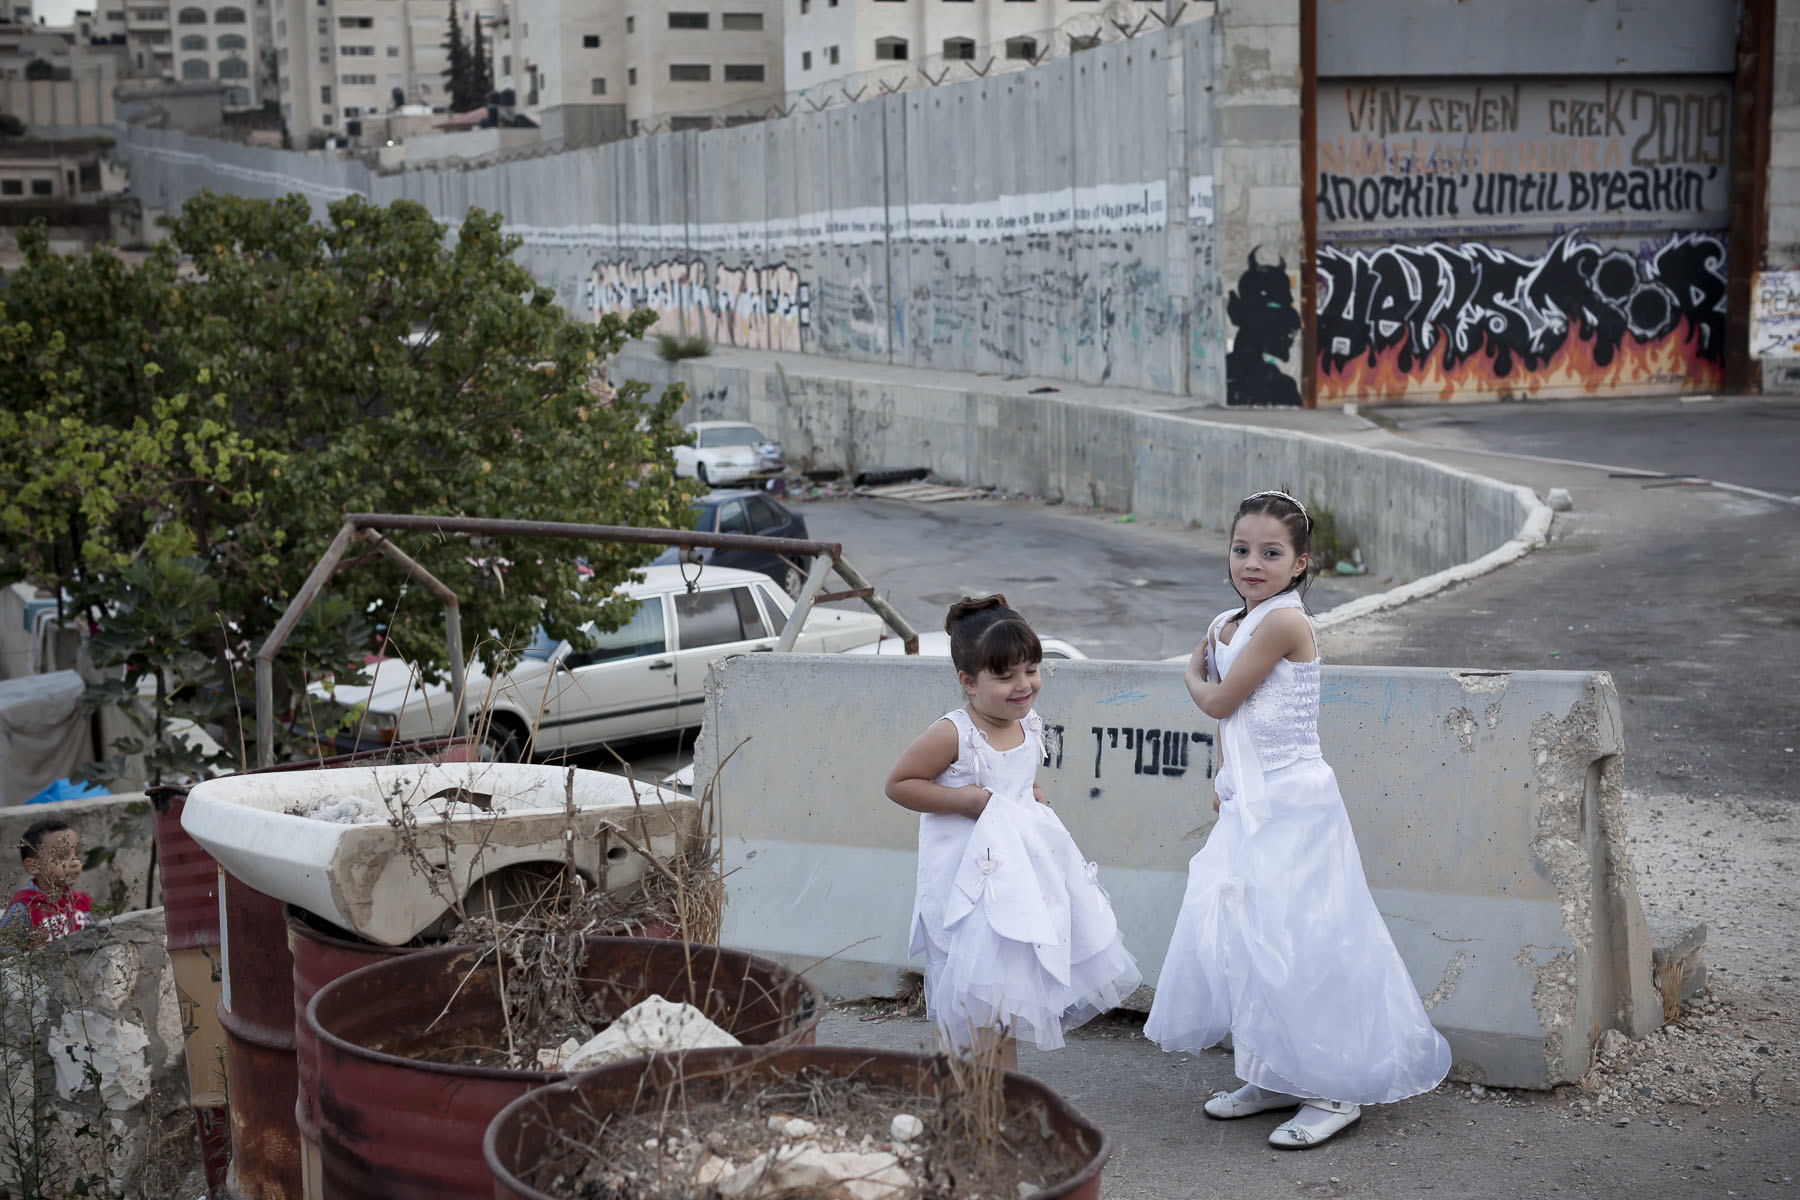 Palestinian little girls by the separation wall in October 2010